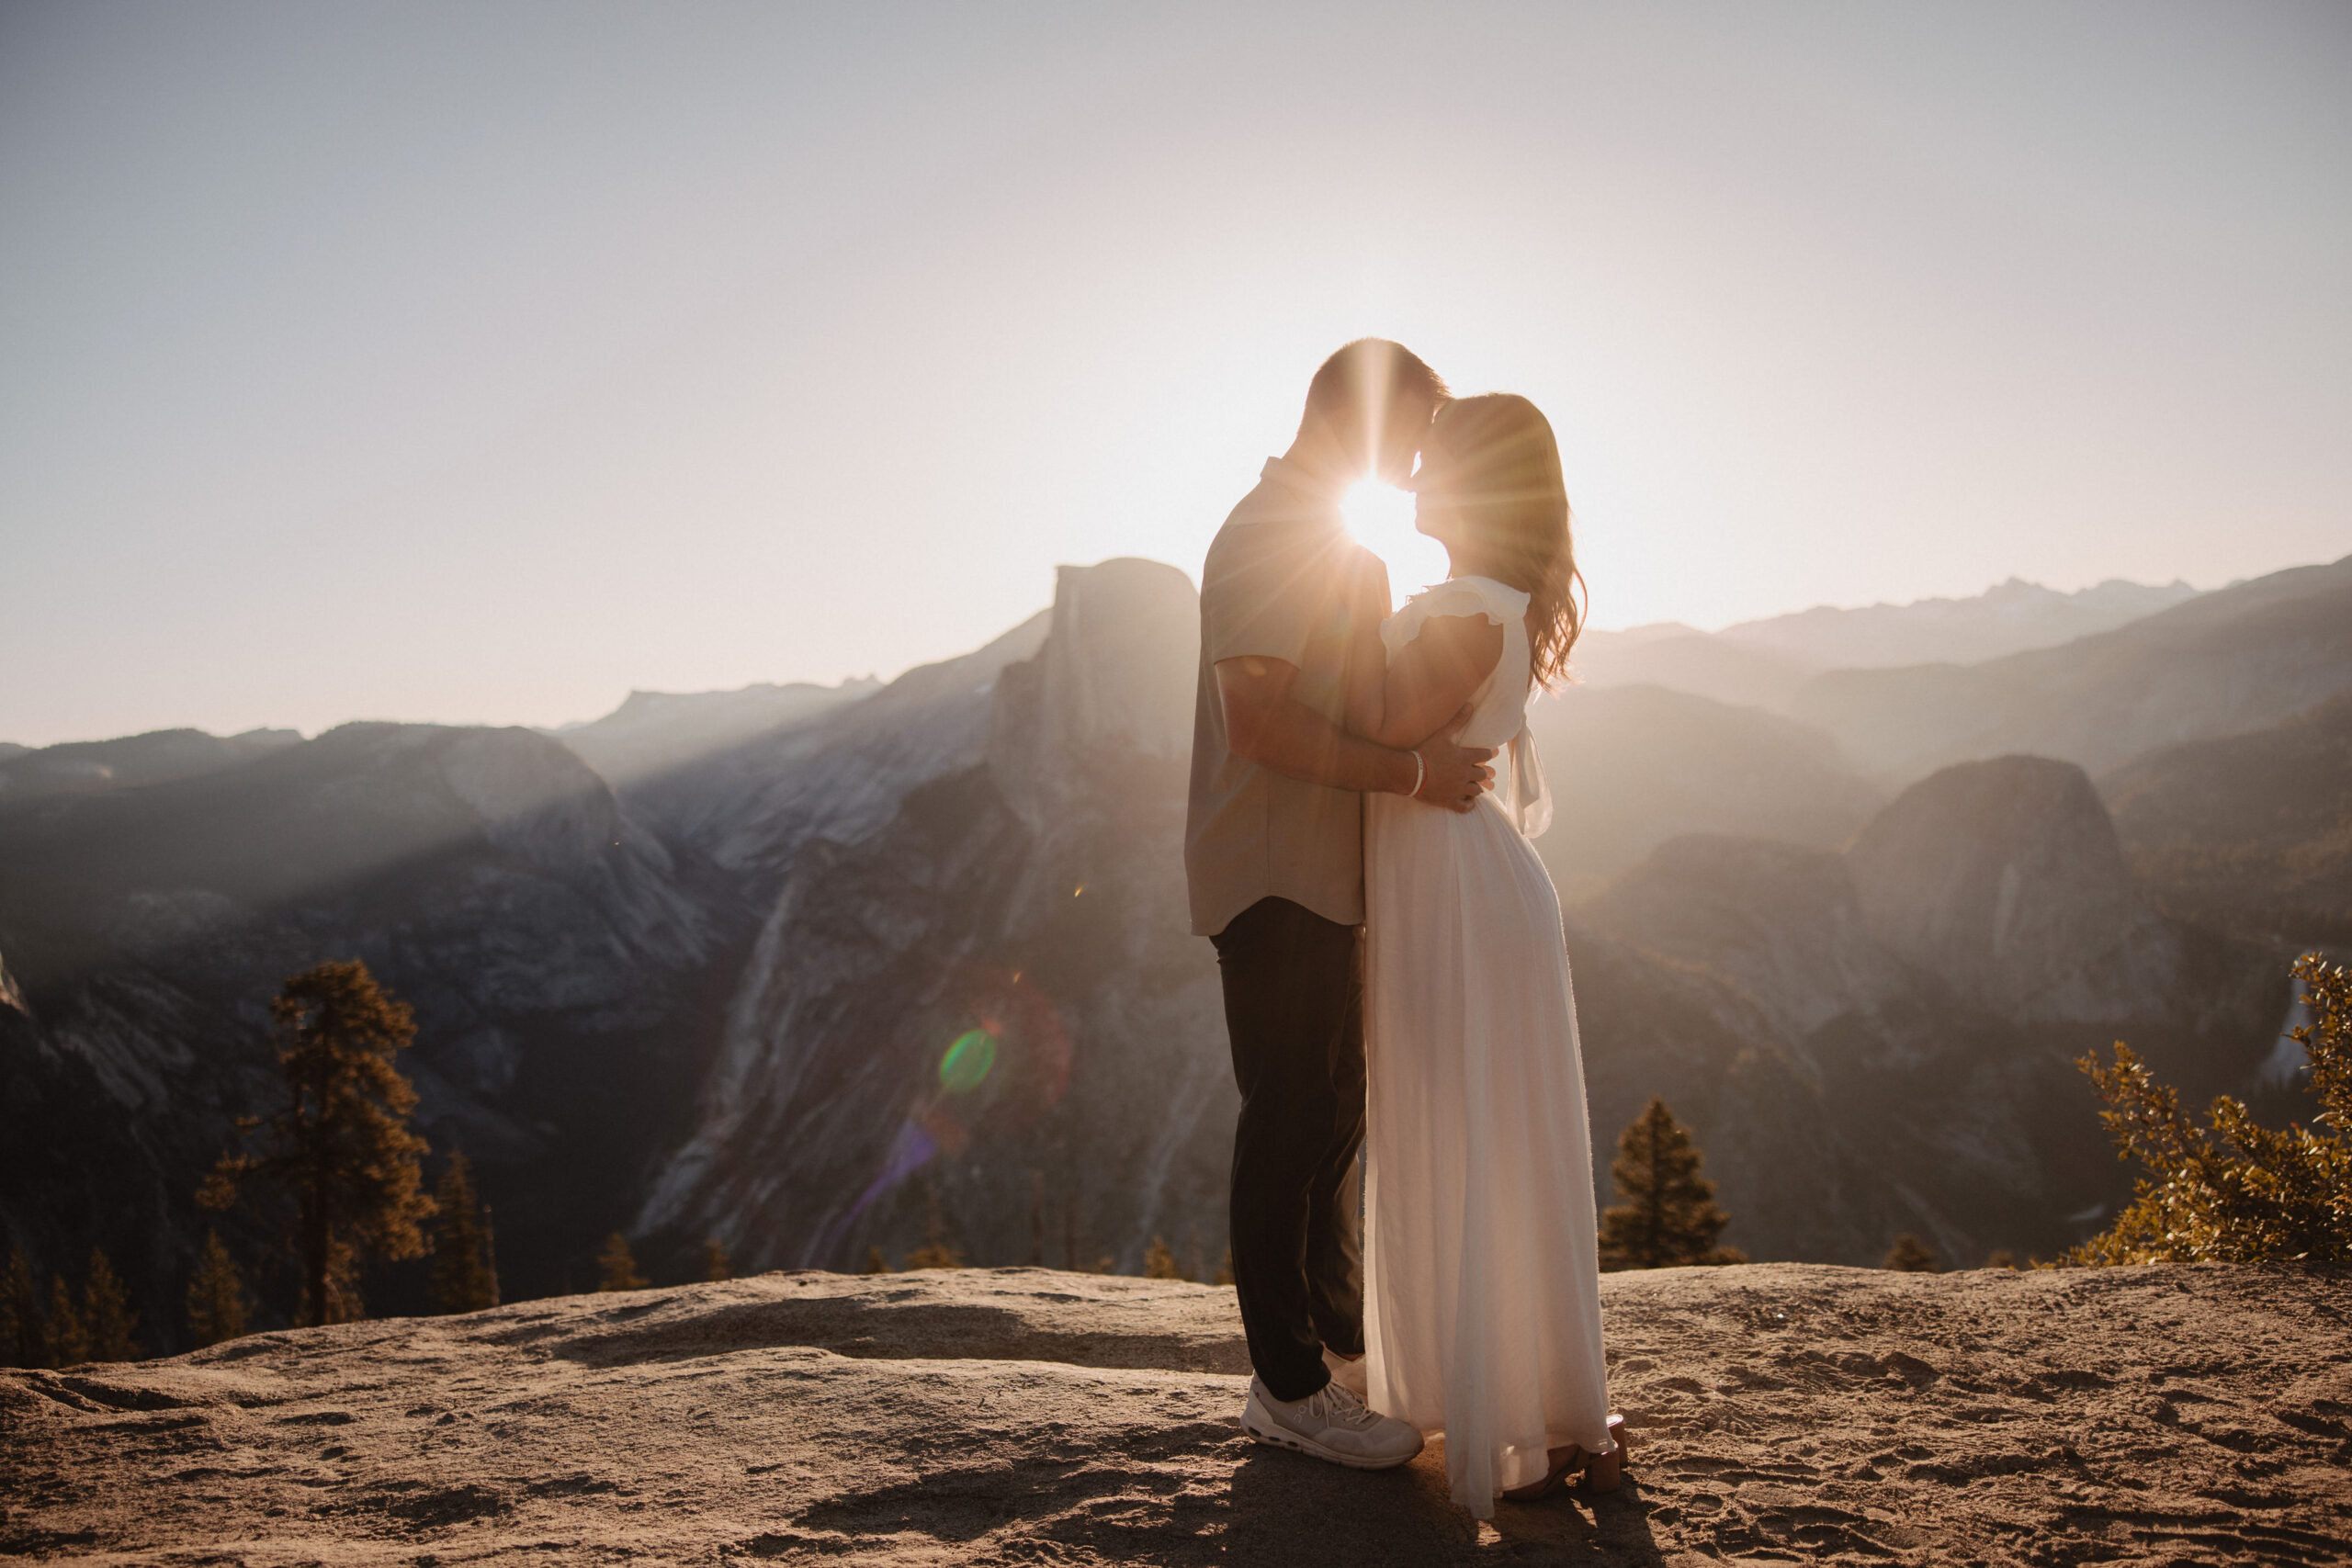 A couple stands on a cliff at sunset, sharing a kiss with a mountainous landscape behind them.